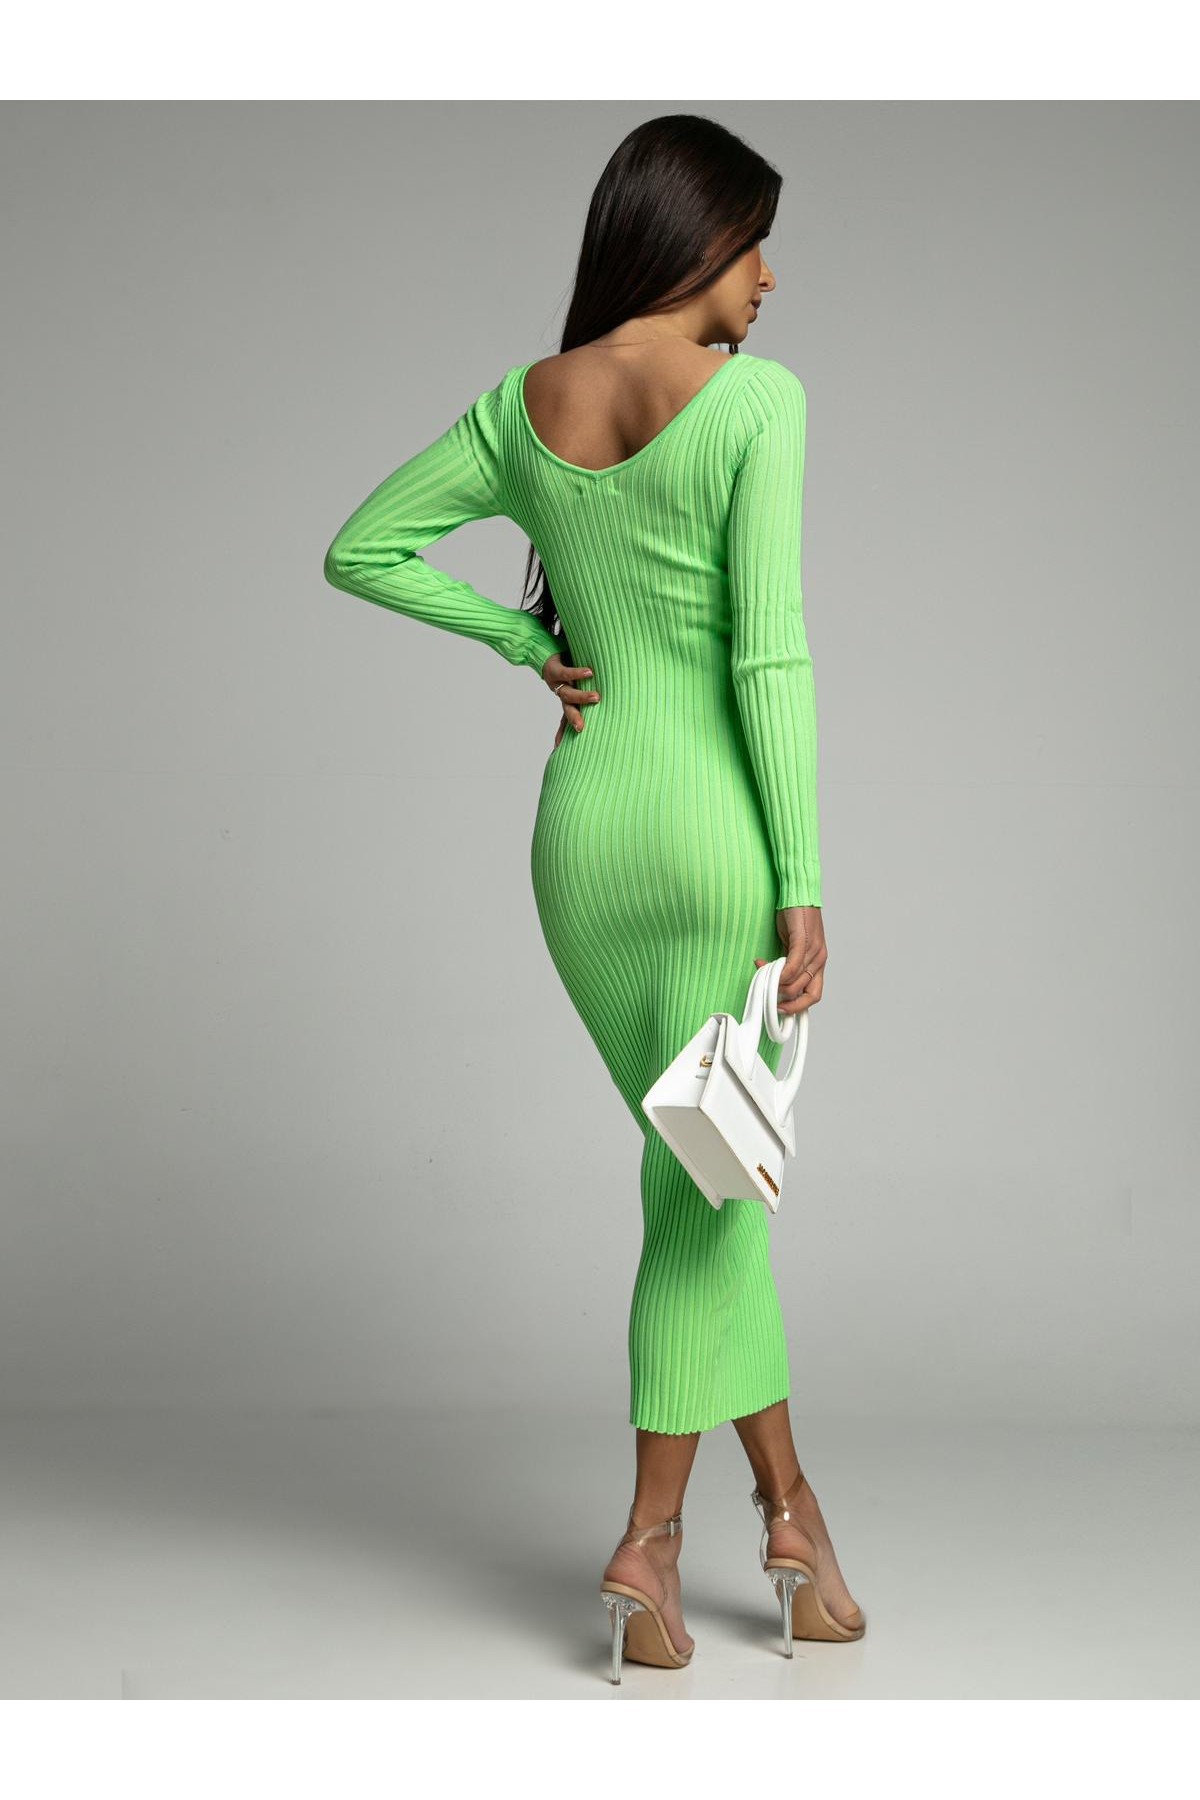 Lime pencil dress with a neckline on the back